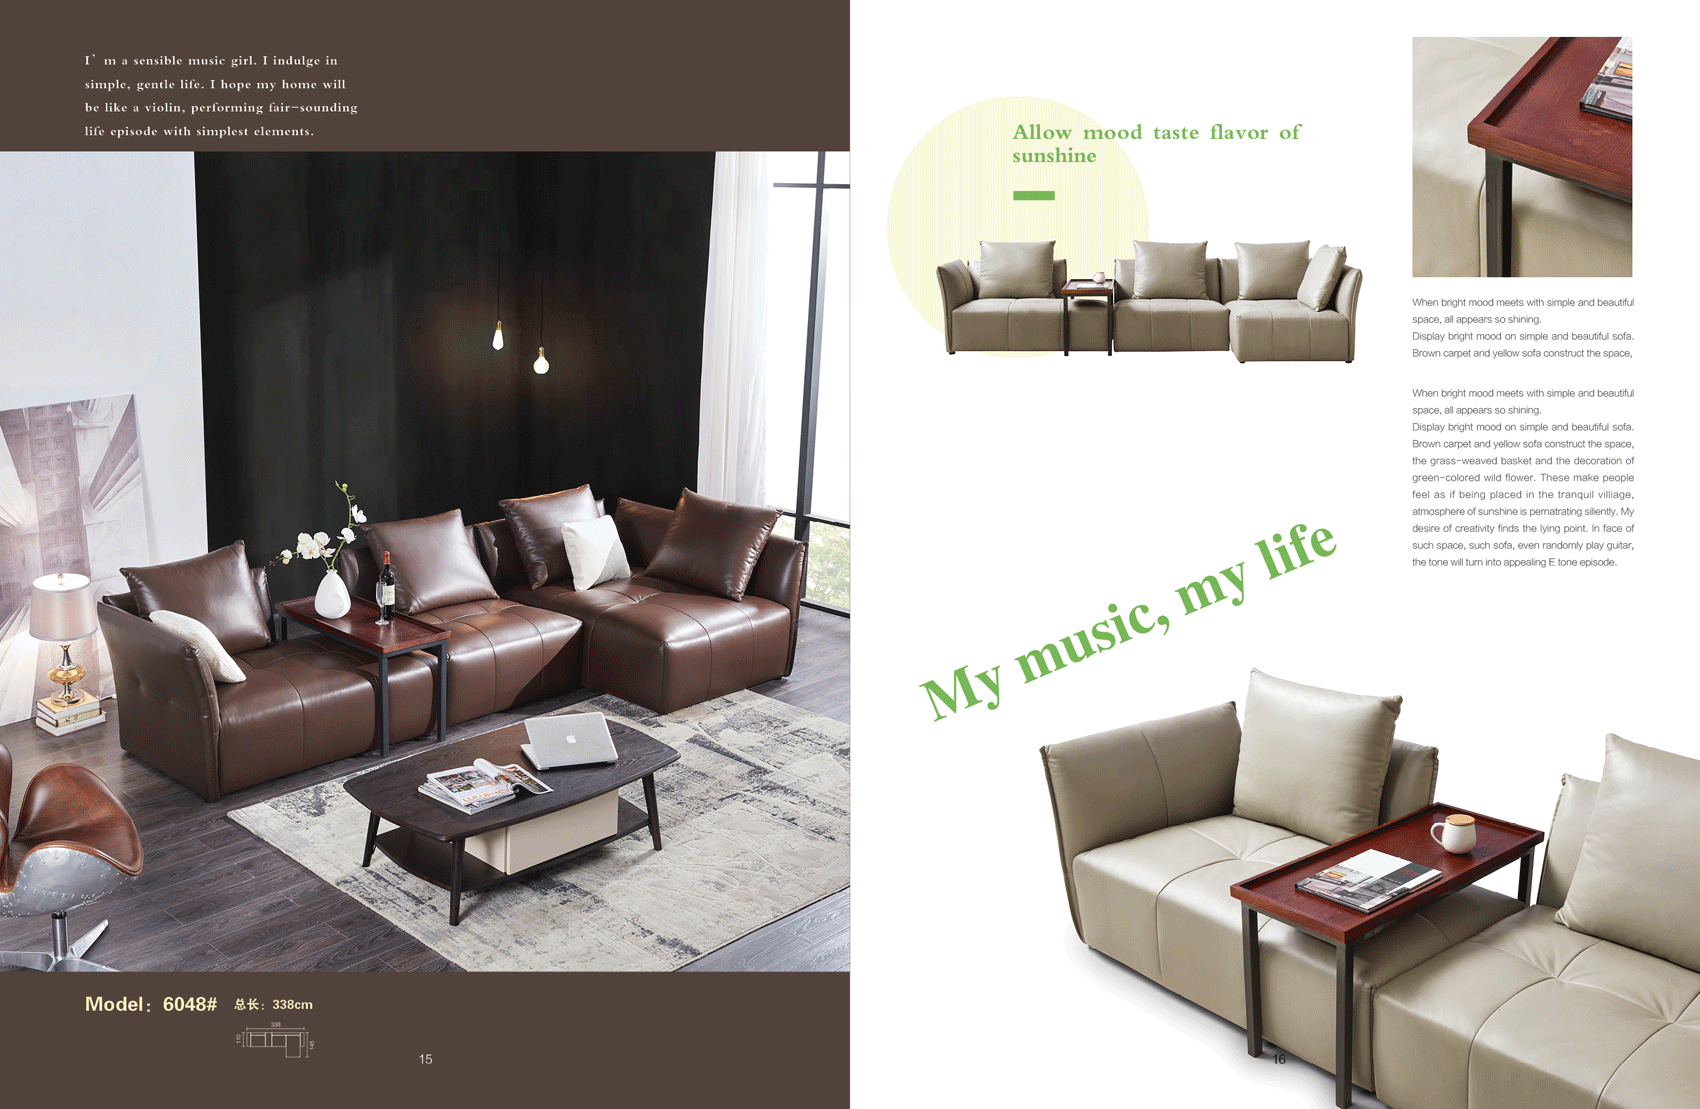 Living Room Furniture Reclining and Sliding Seats Sets 6048 Sectional